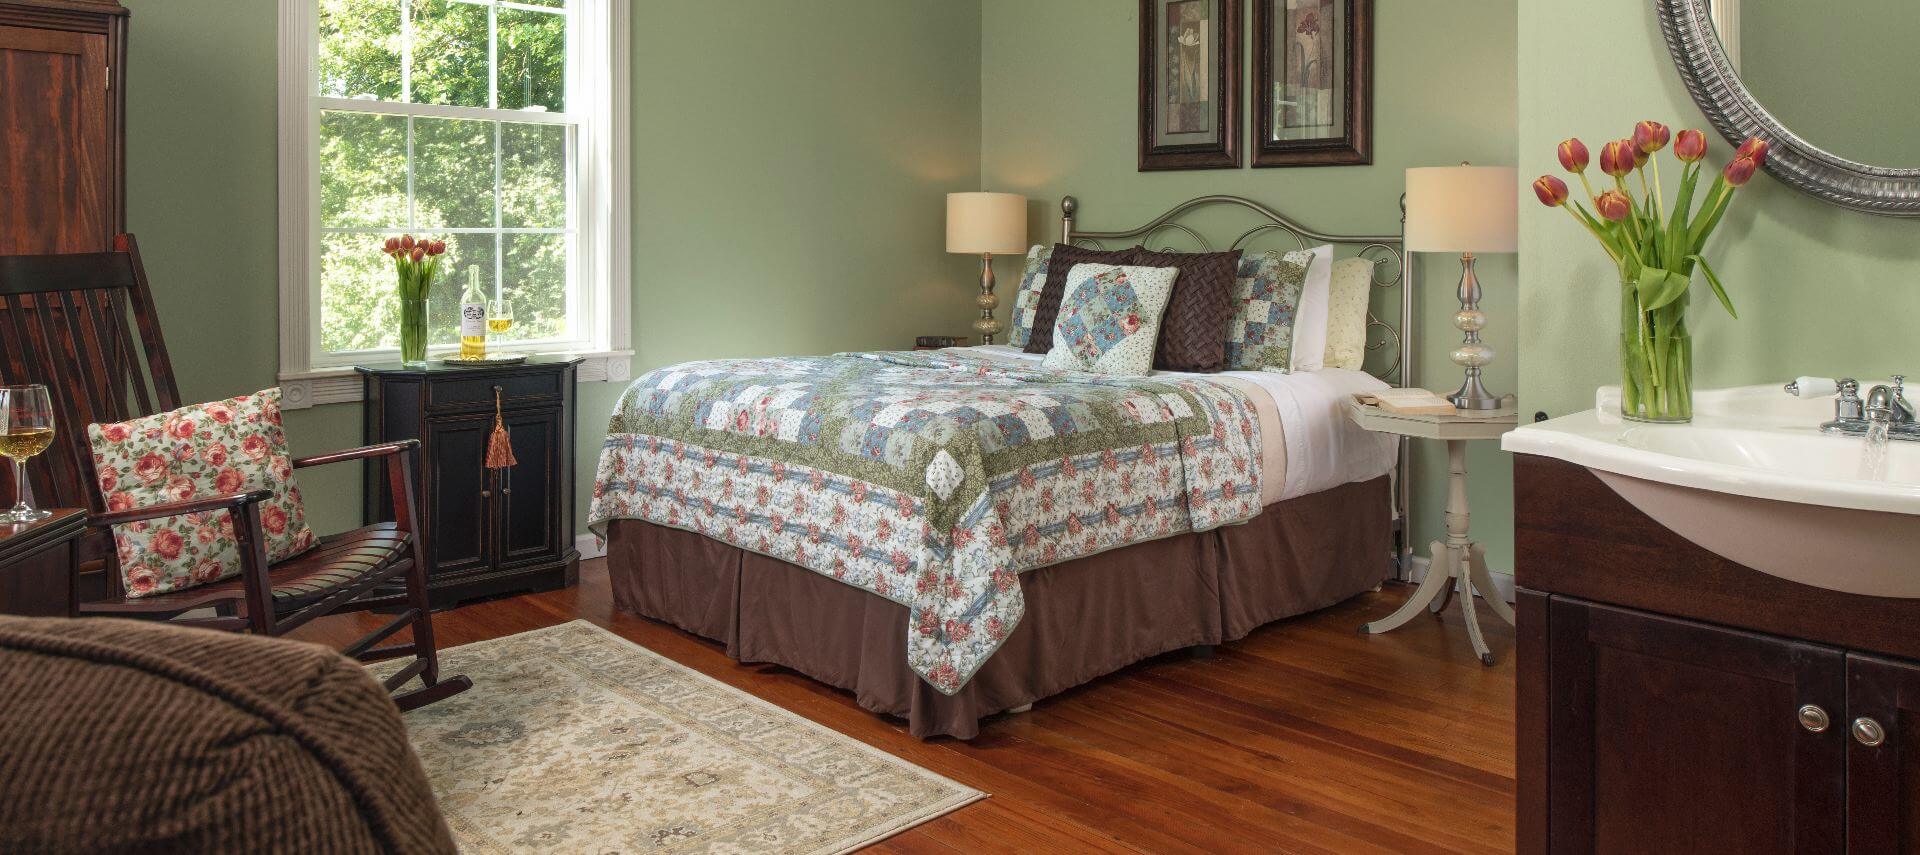 Wood floors in a guest room with light green walls and large bed covered in a coordinating quilt.